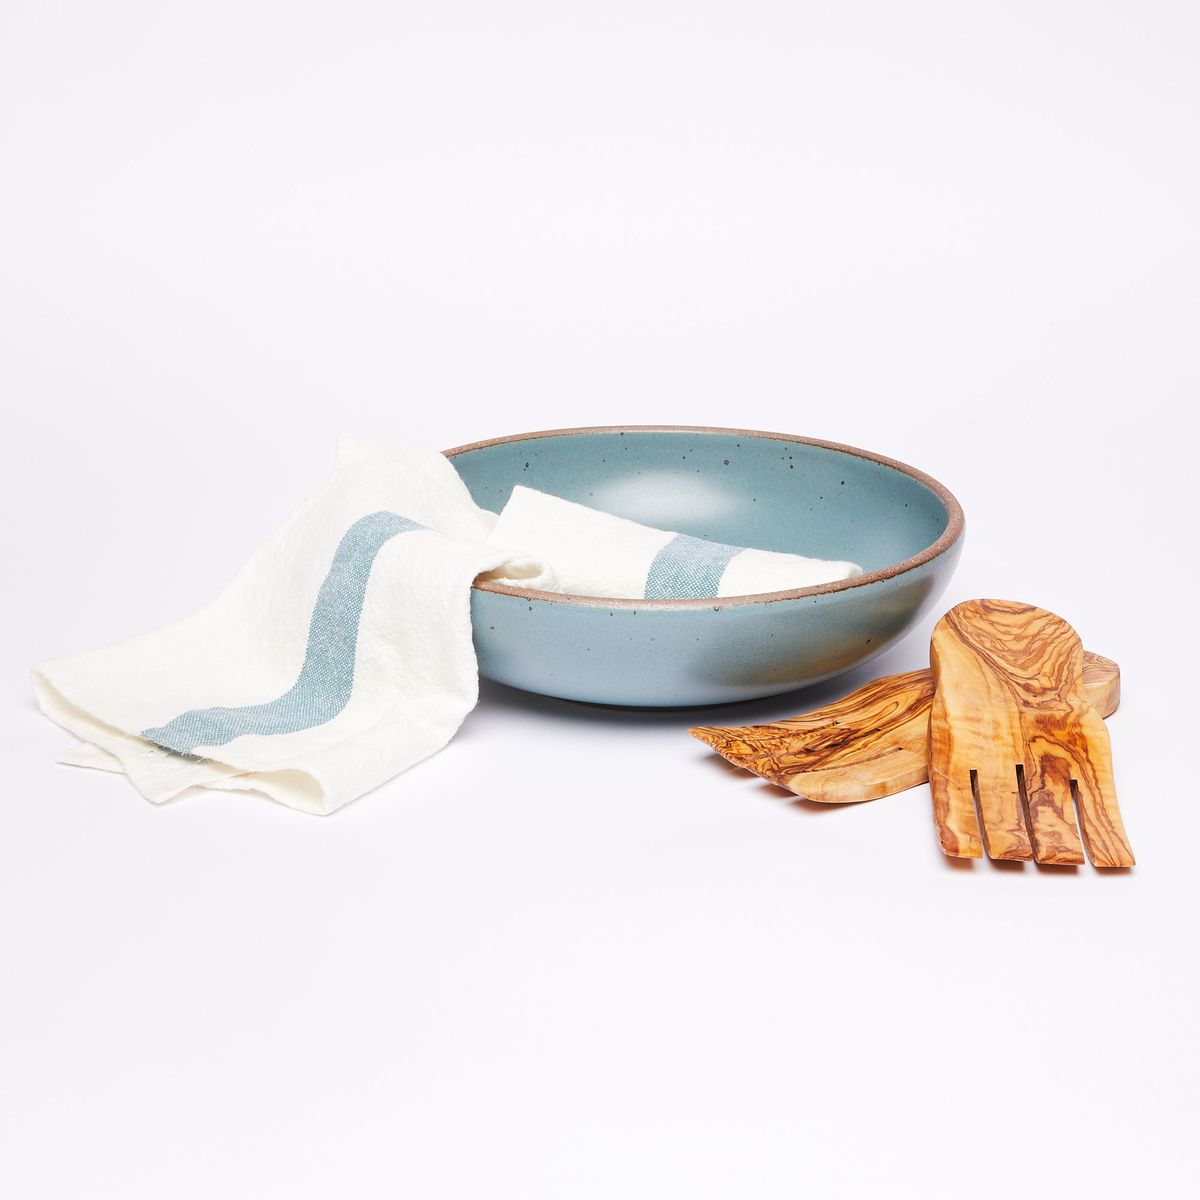 White tea towel with blue stripe on a large shallow turquoise serving bowl next to a pair of olivewood salad hands